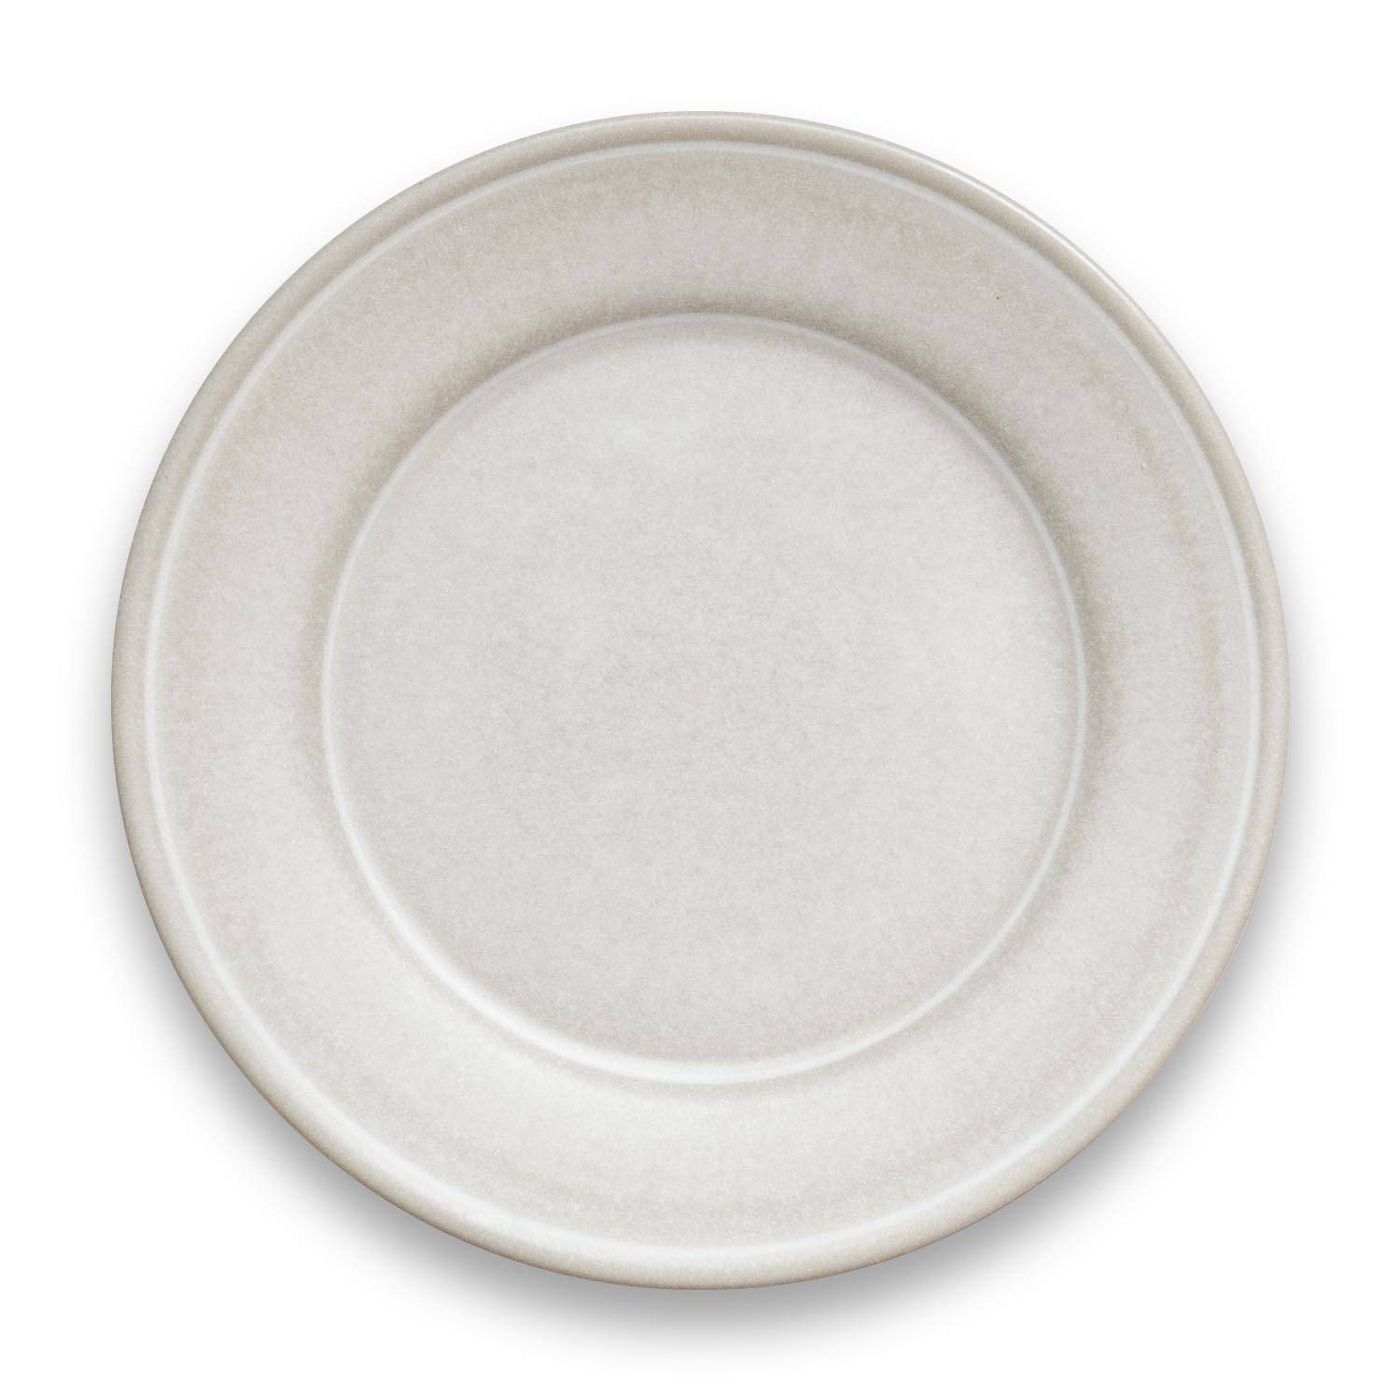 Clumsy Friends and Chic Outdoor Parties Can Coexist With This Unbreakable Dinnerware